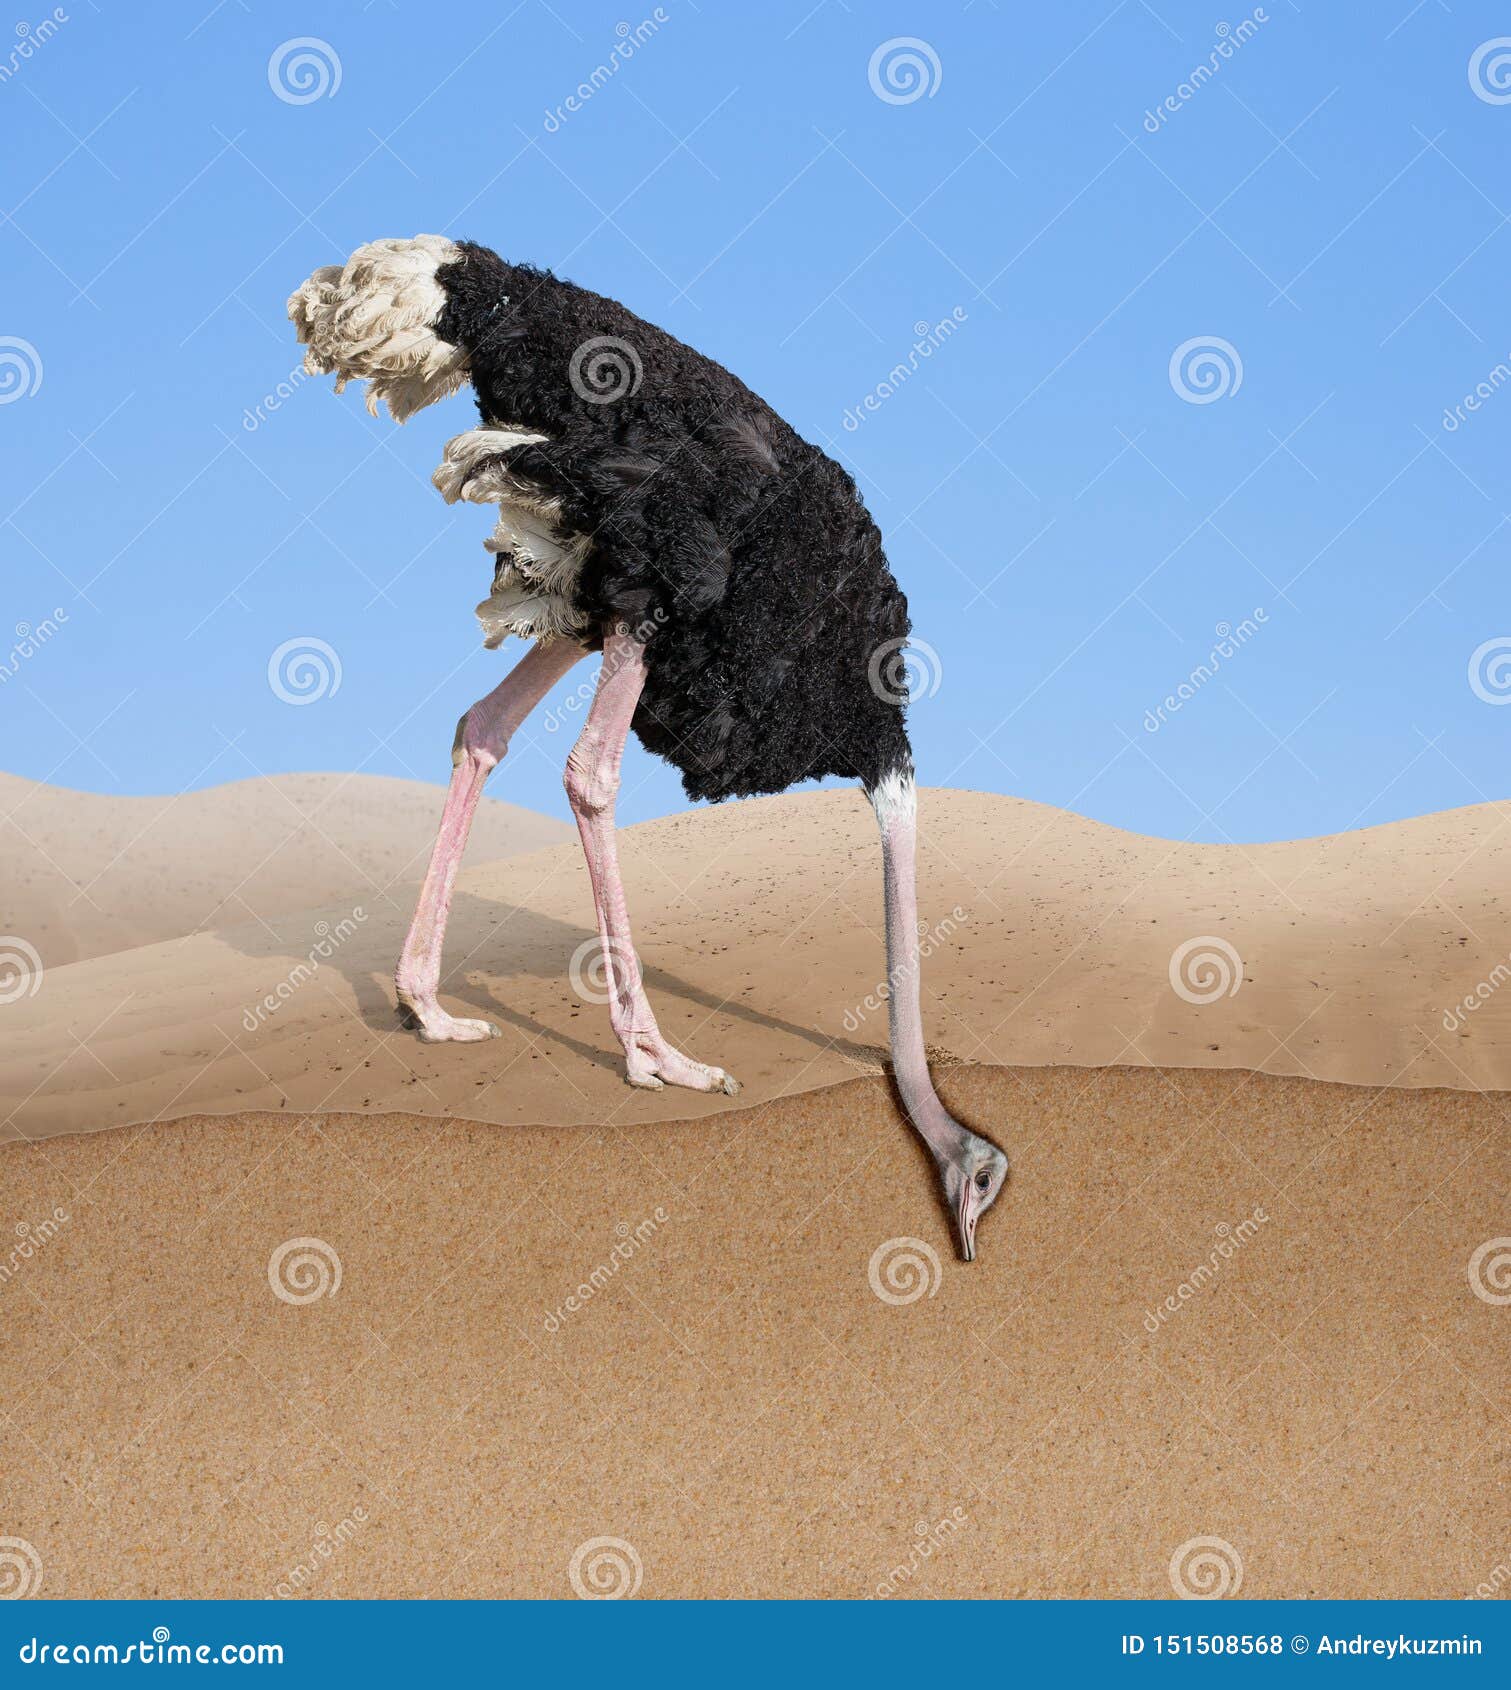 Ostrich with Head Burying in Sand Concept Stock Photo - Image of concept,  denial: 151508568